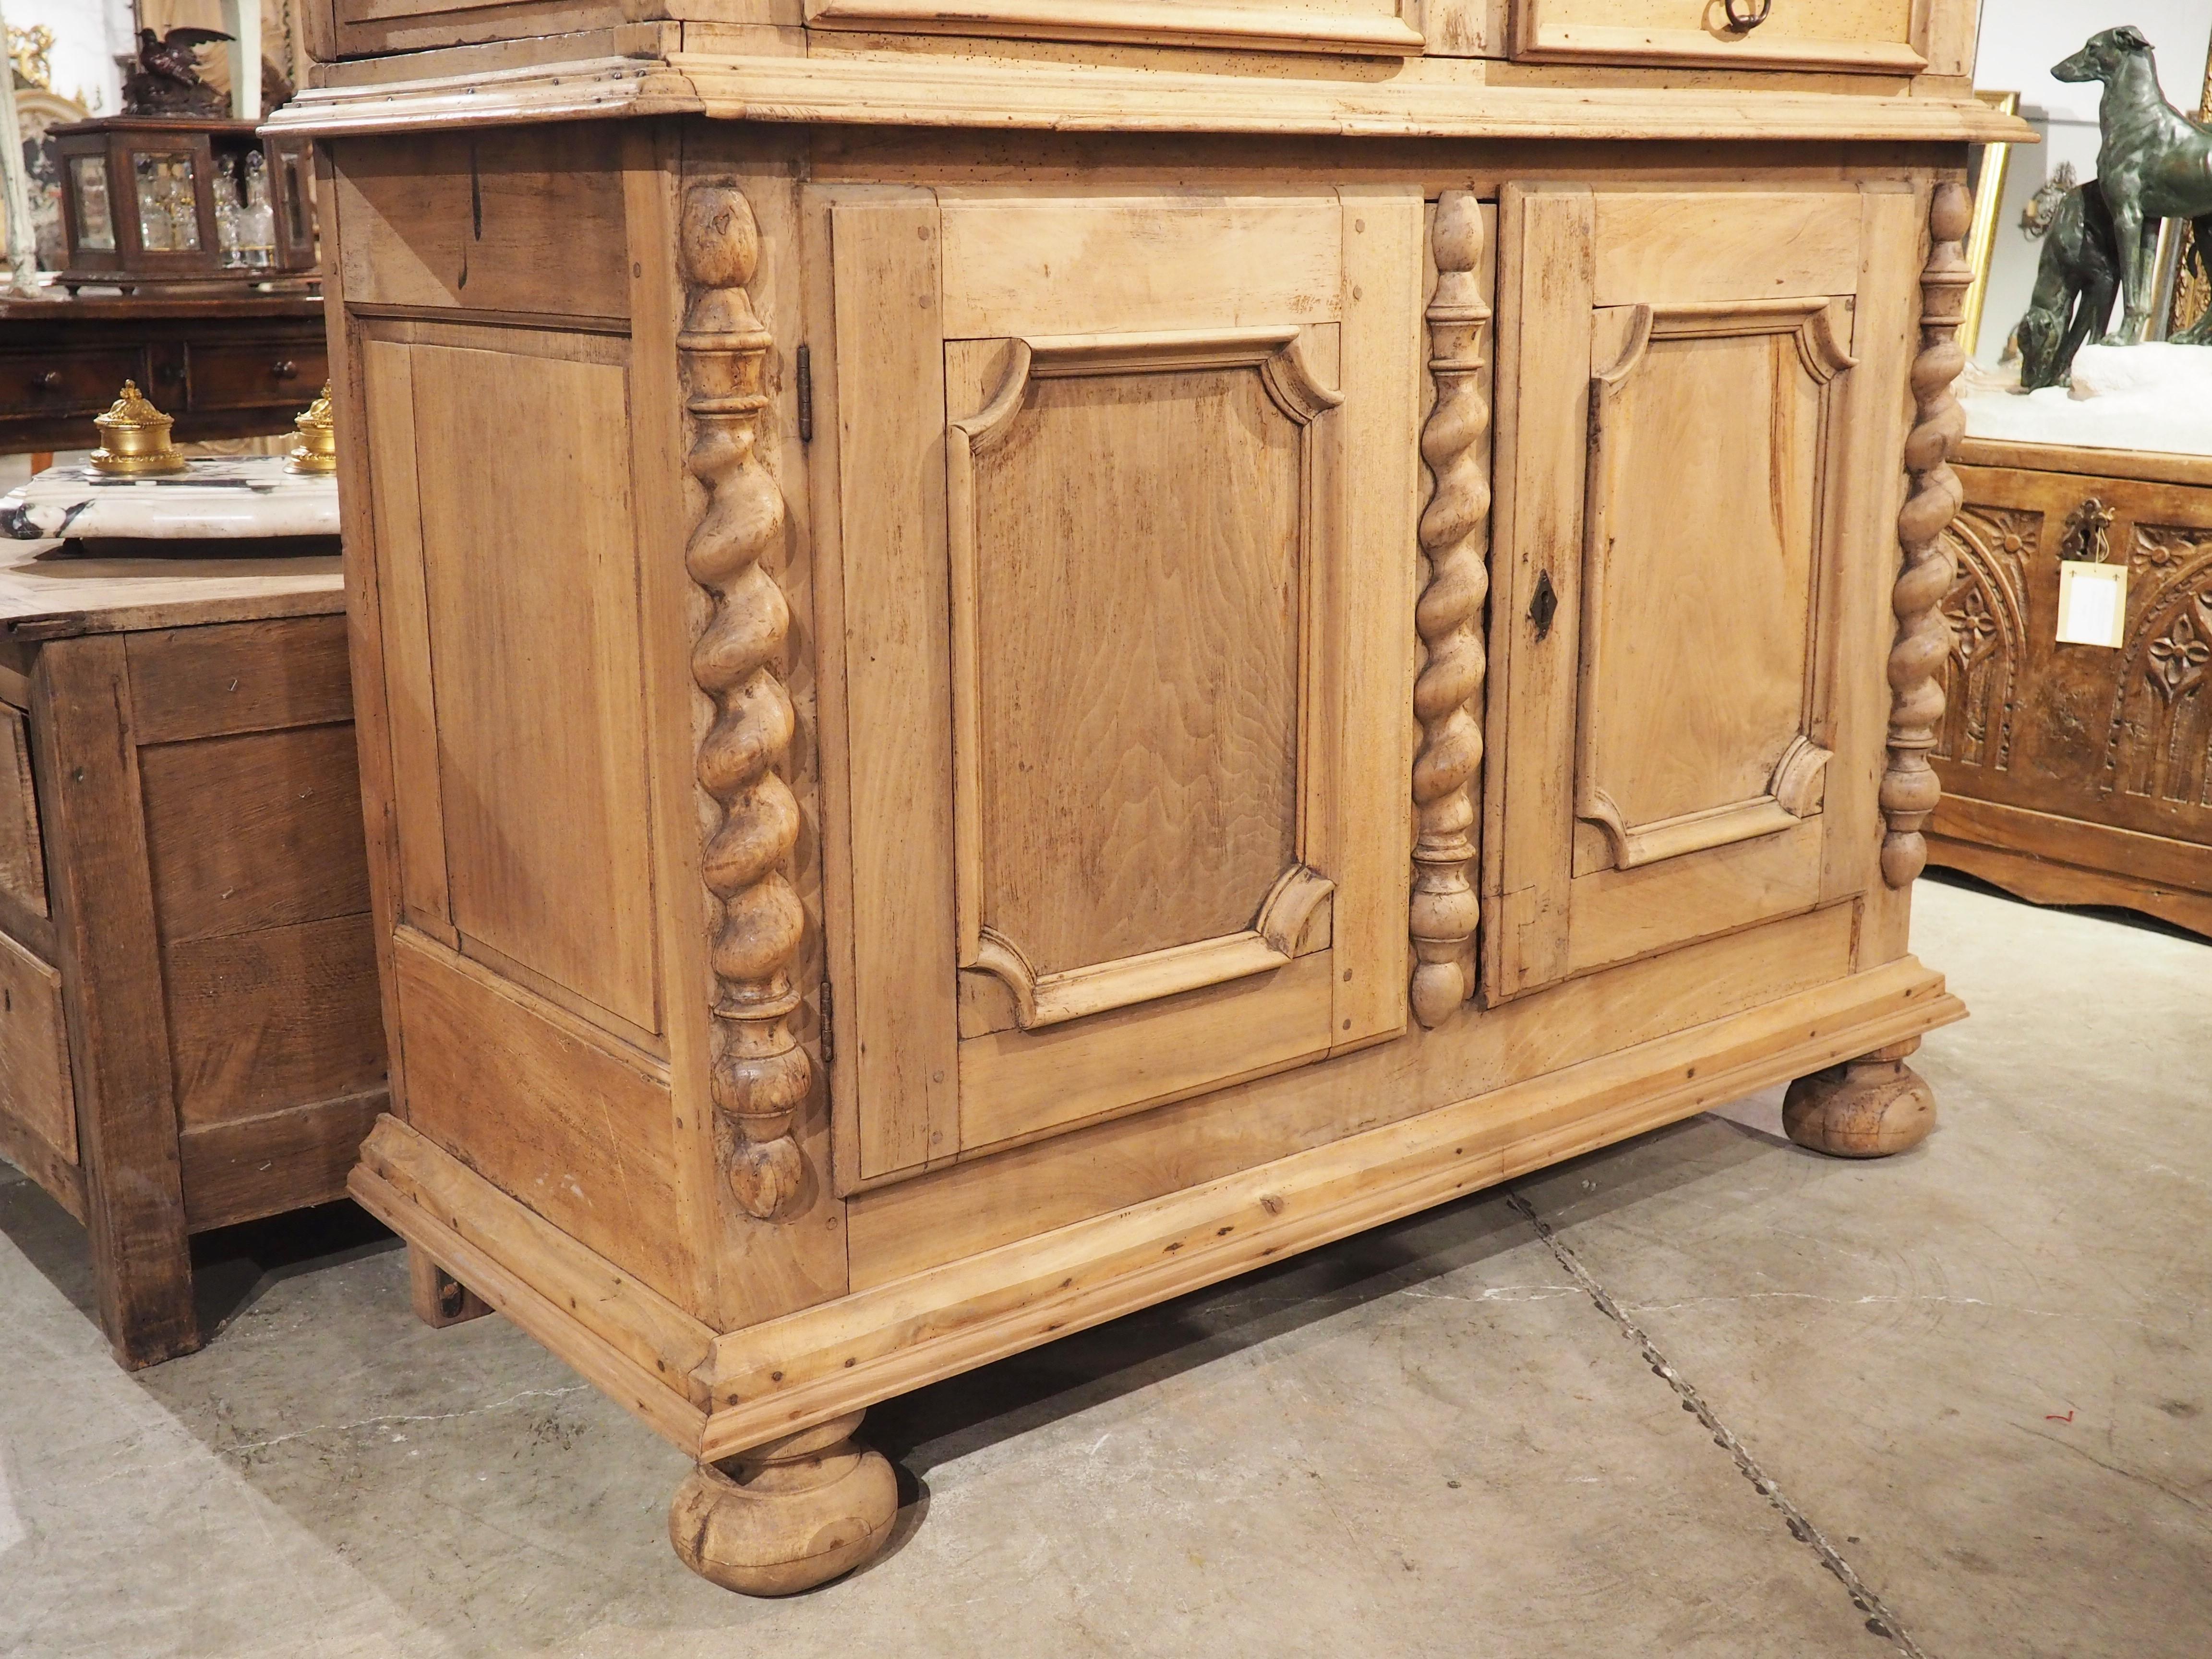 French 18th Century Bleached Walnut 4 Door Buffet from Lyon, France